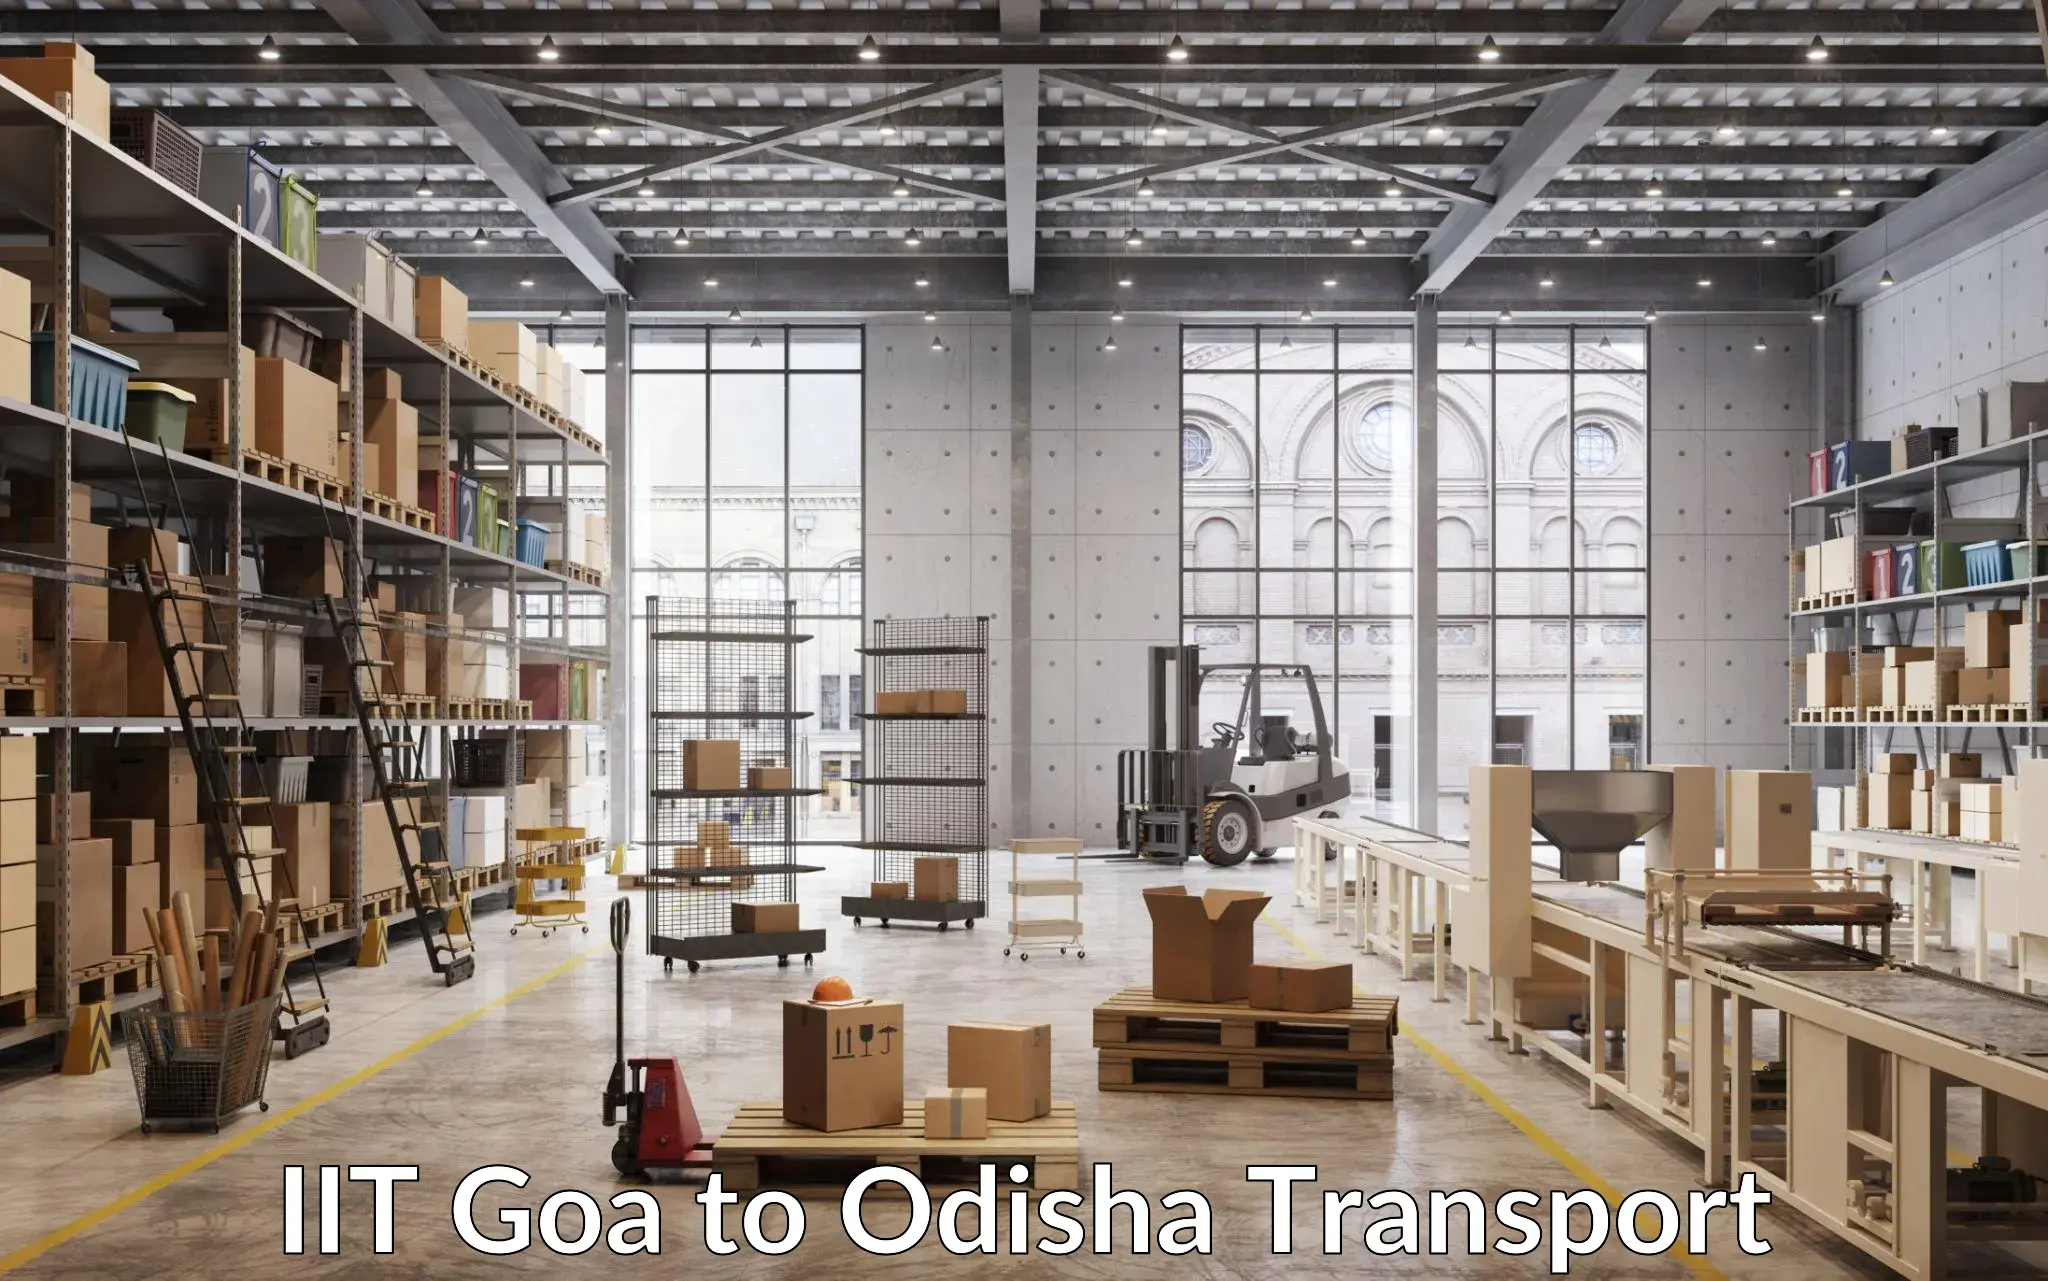 Transport shared services in IIT Goa to Sohela